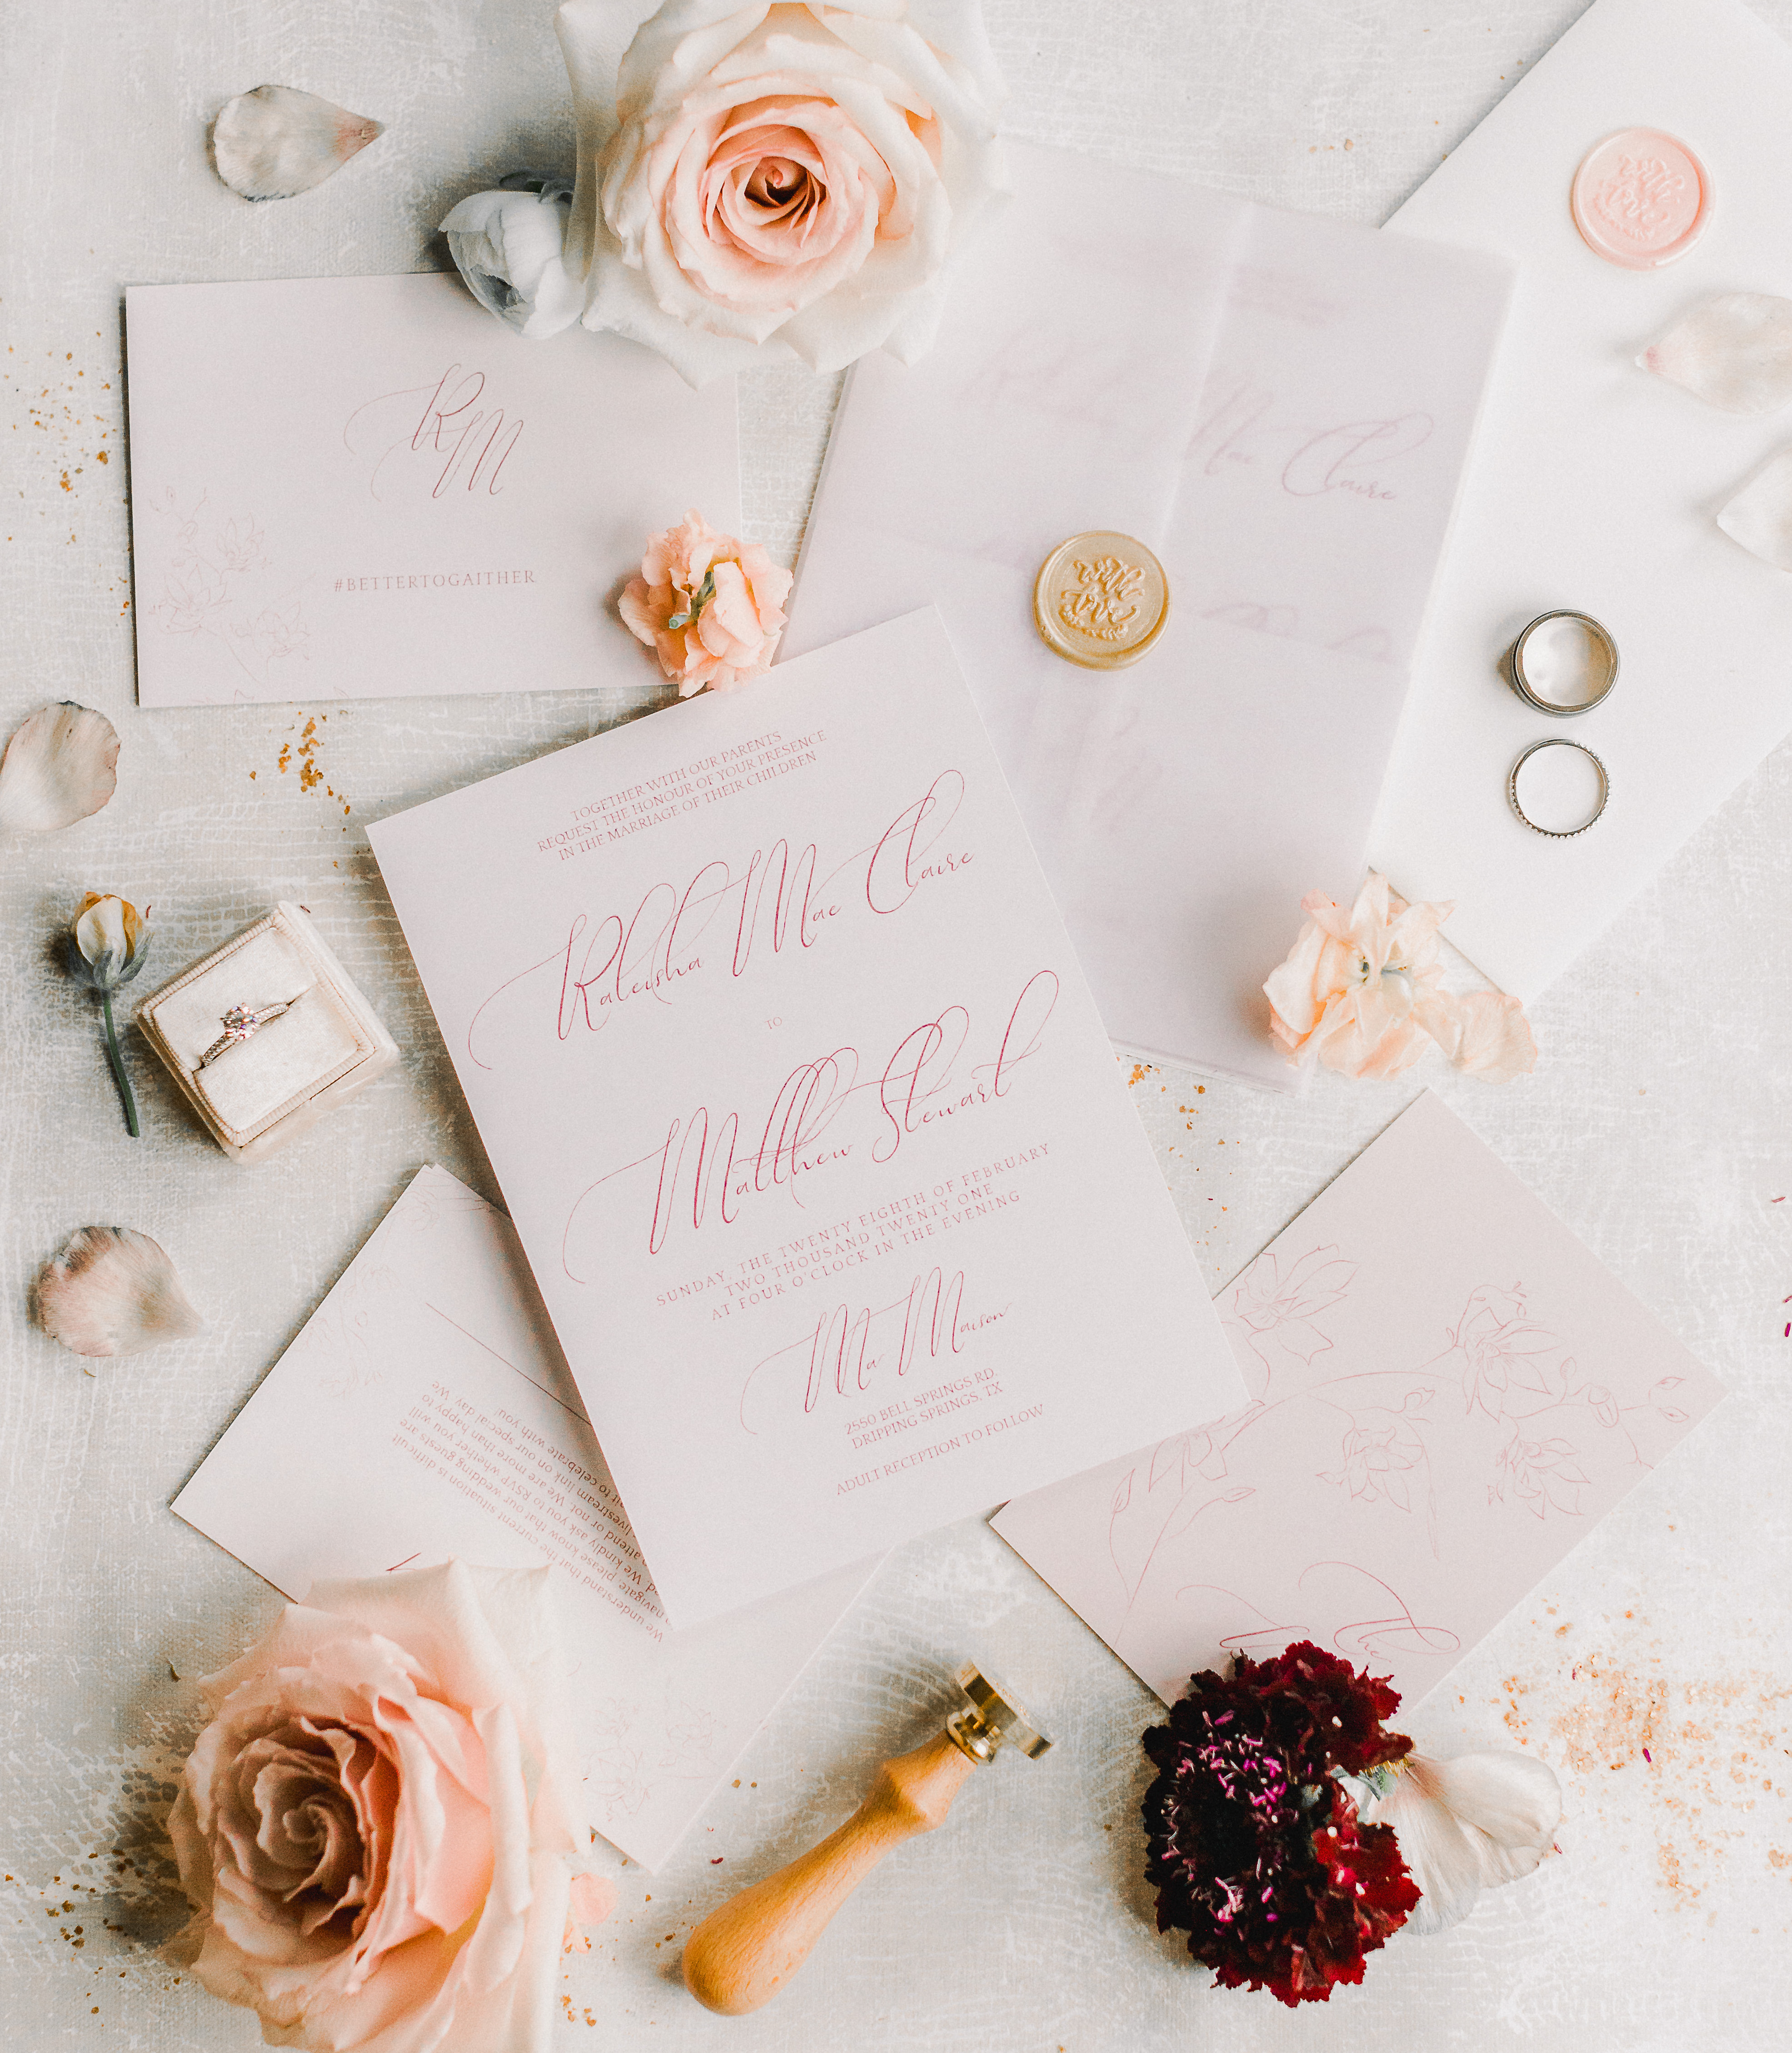 A romantic flat lay of the bride and groom's invitations for their sentimental wedding ceremony